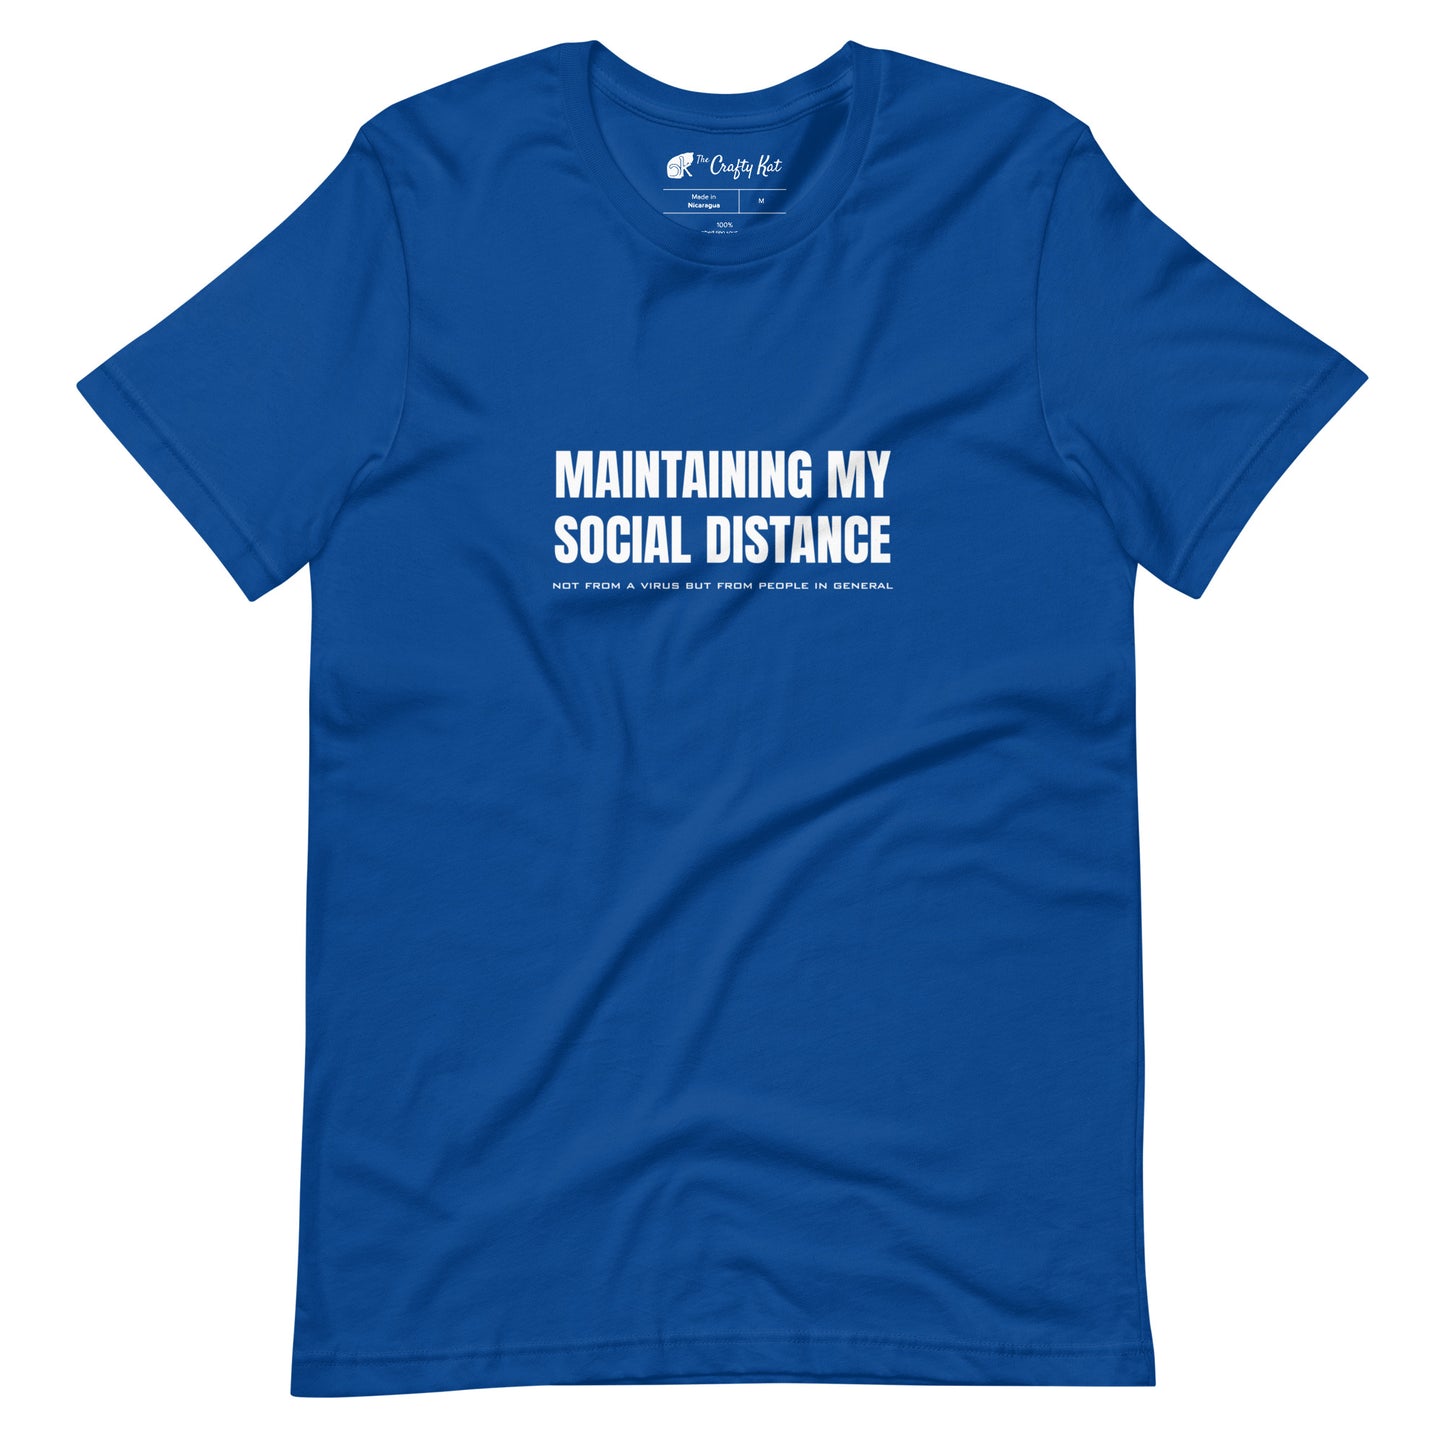 True Royal blue t-shirt with white graphic: "MAINTAINING MY SOCIAL DISTANCE not from a virus but from people in general"